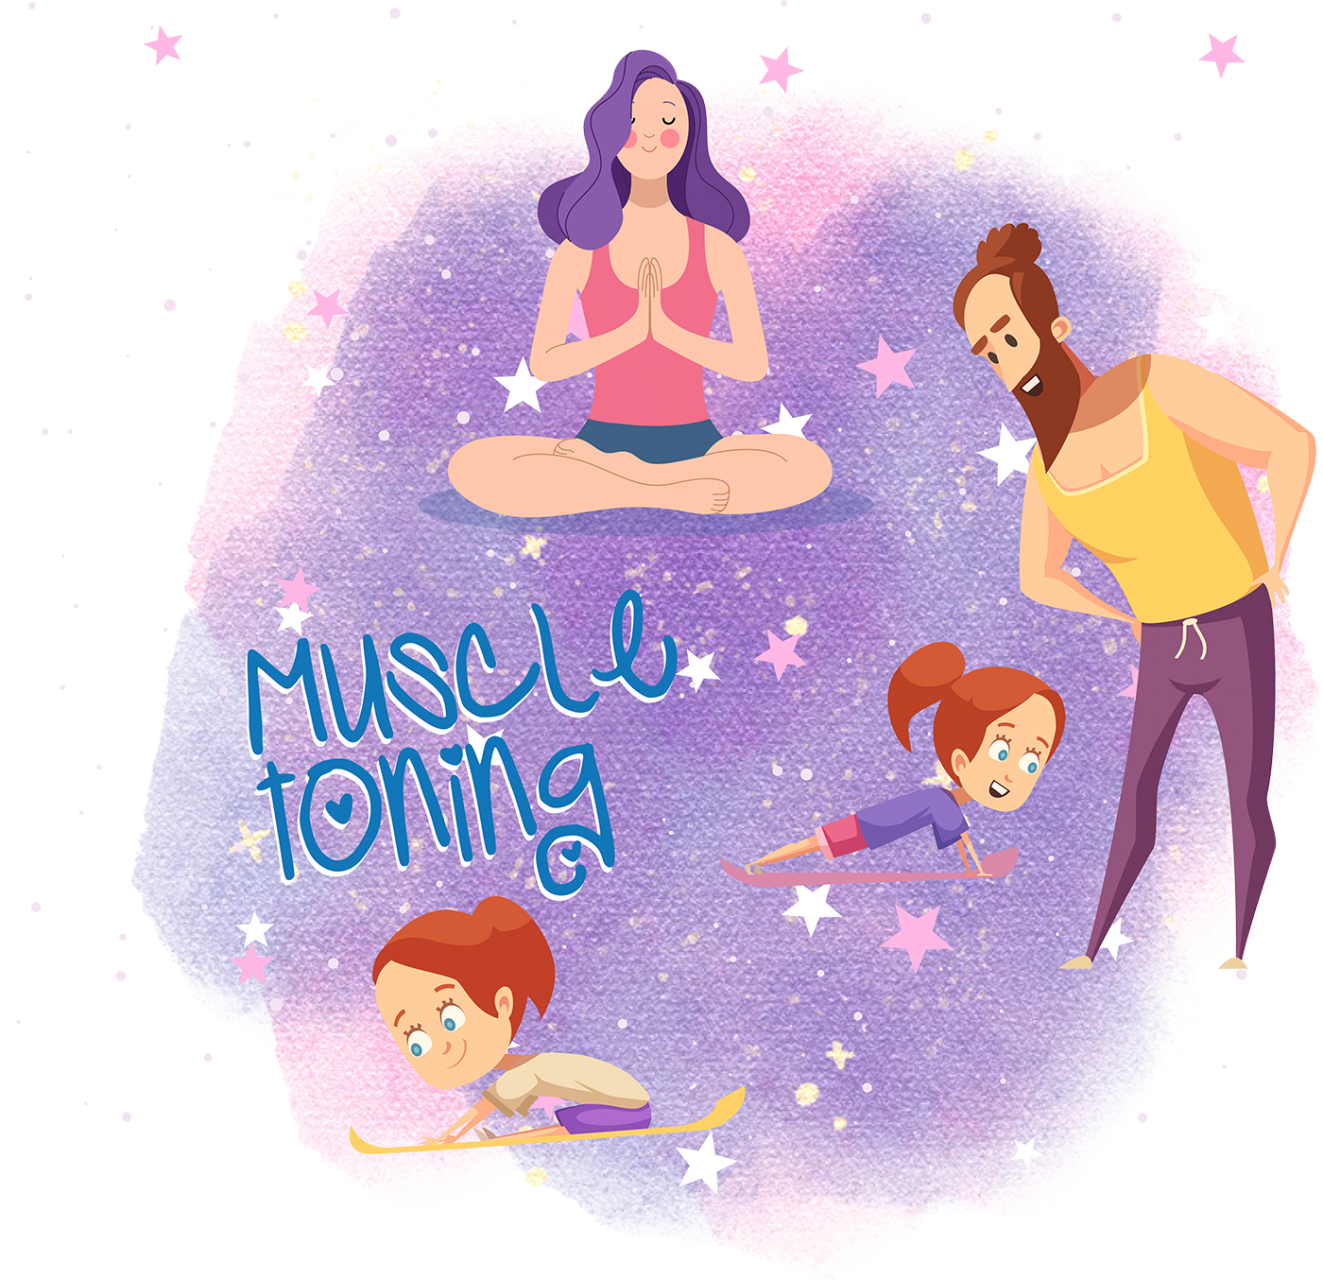 Muscle toning